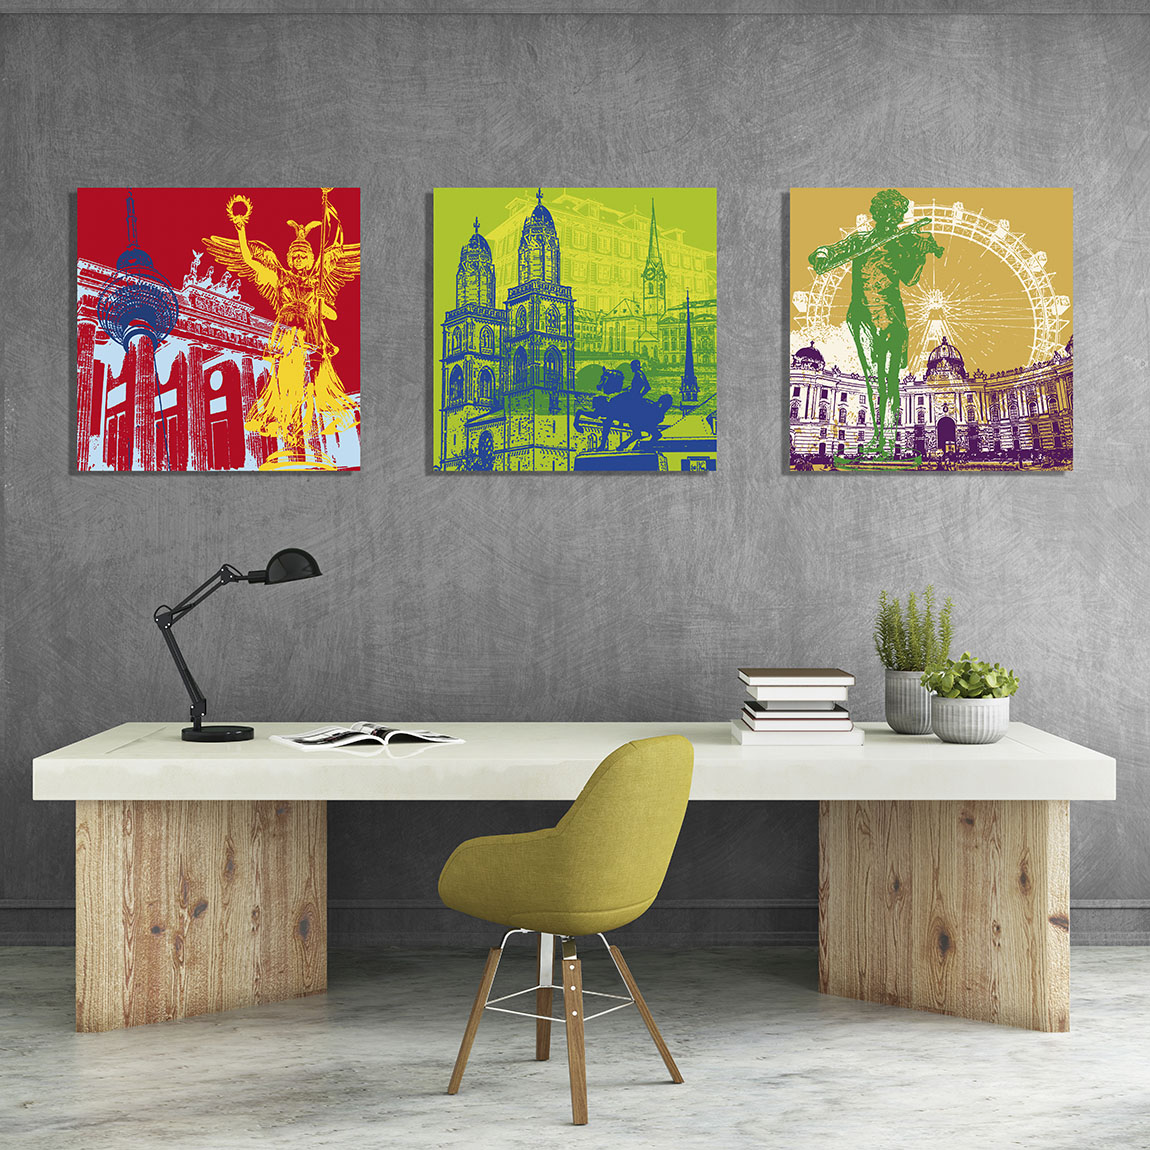 ART DOMINO®: TURN YOUR FAVOURITE LOCATION INTO A PIECE OF ART